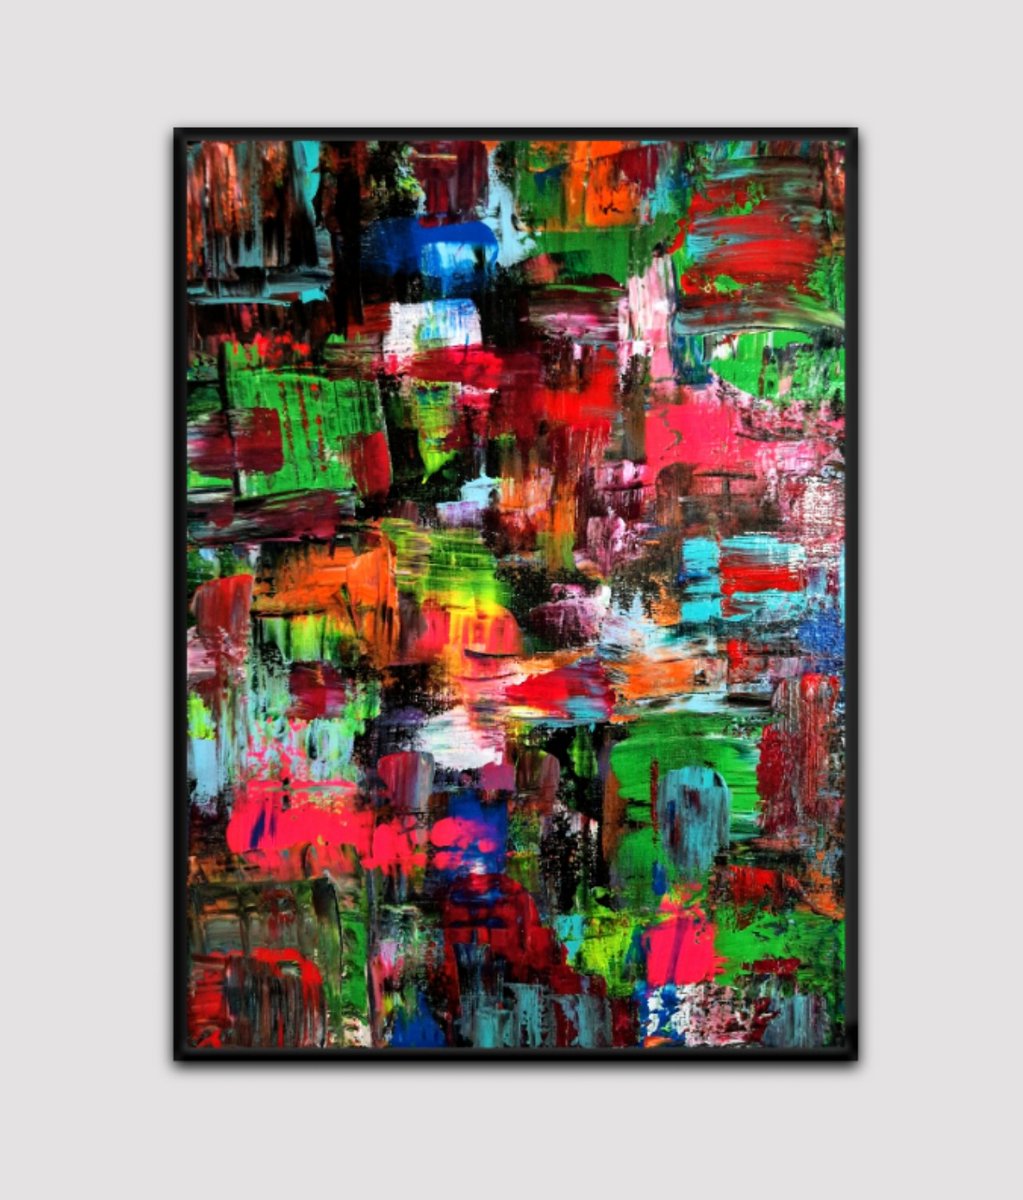 'Spectrum of emotions' 30x40 canvas #abstract #abstractpainting #Abstractartwork #abstractart #modernabstract #abstraction #AbstractExpressionism #contemporary #contemporaryart